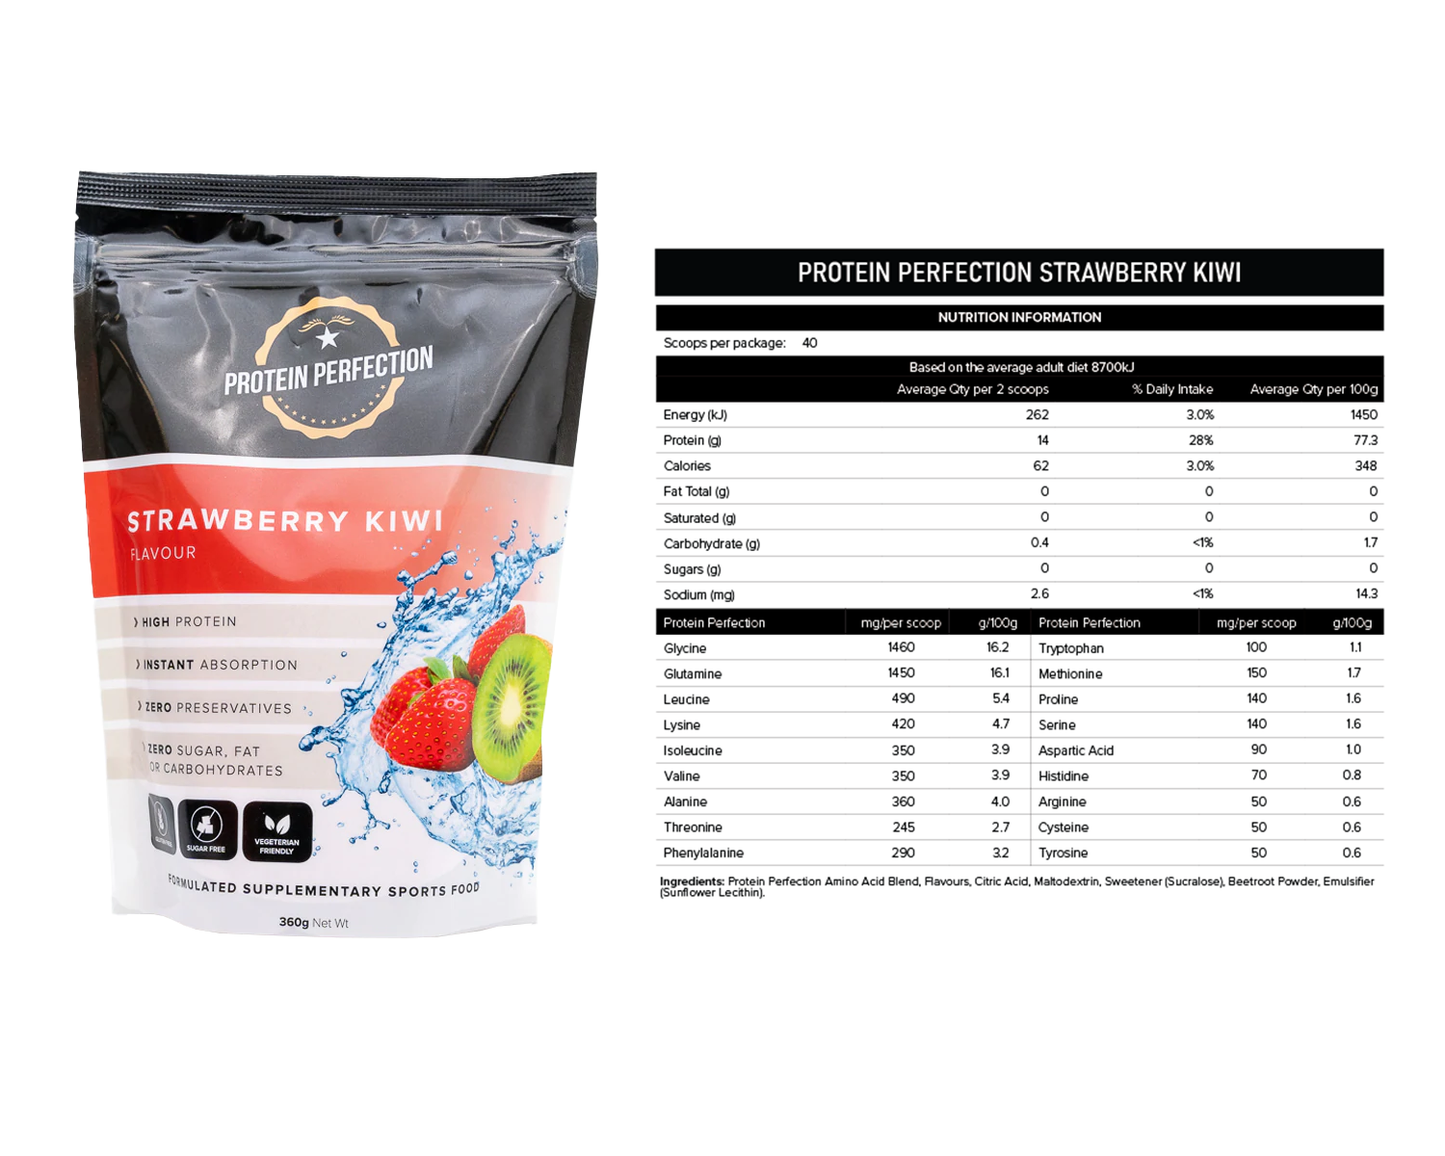 Protein Perfection - "Protein Water" Bag